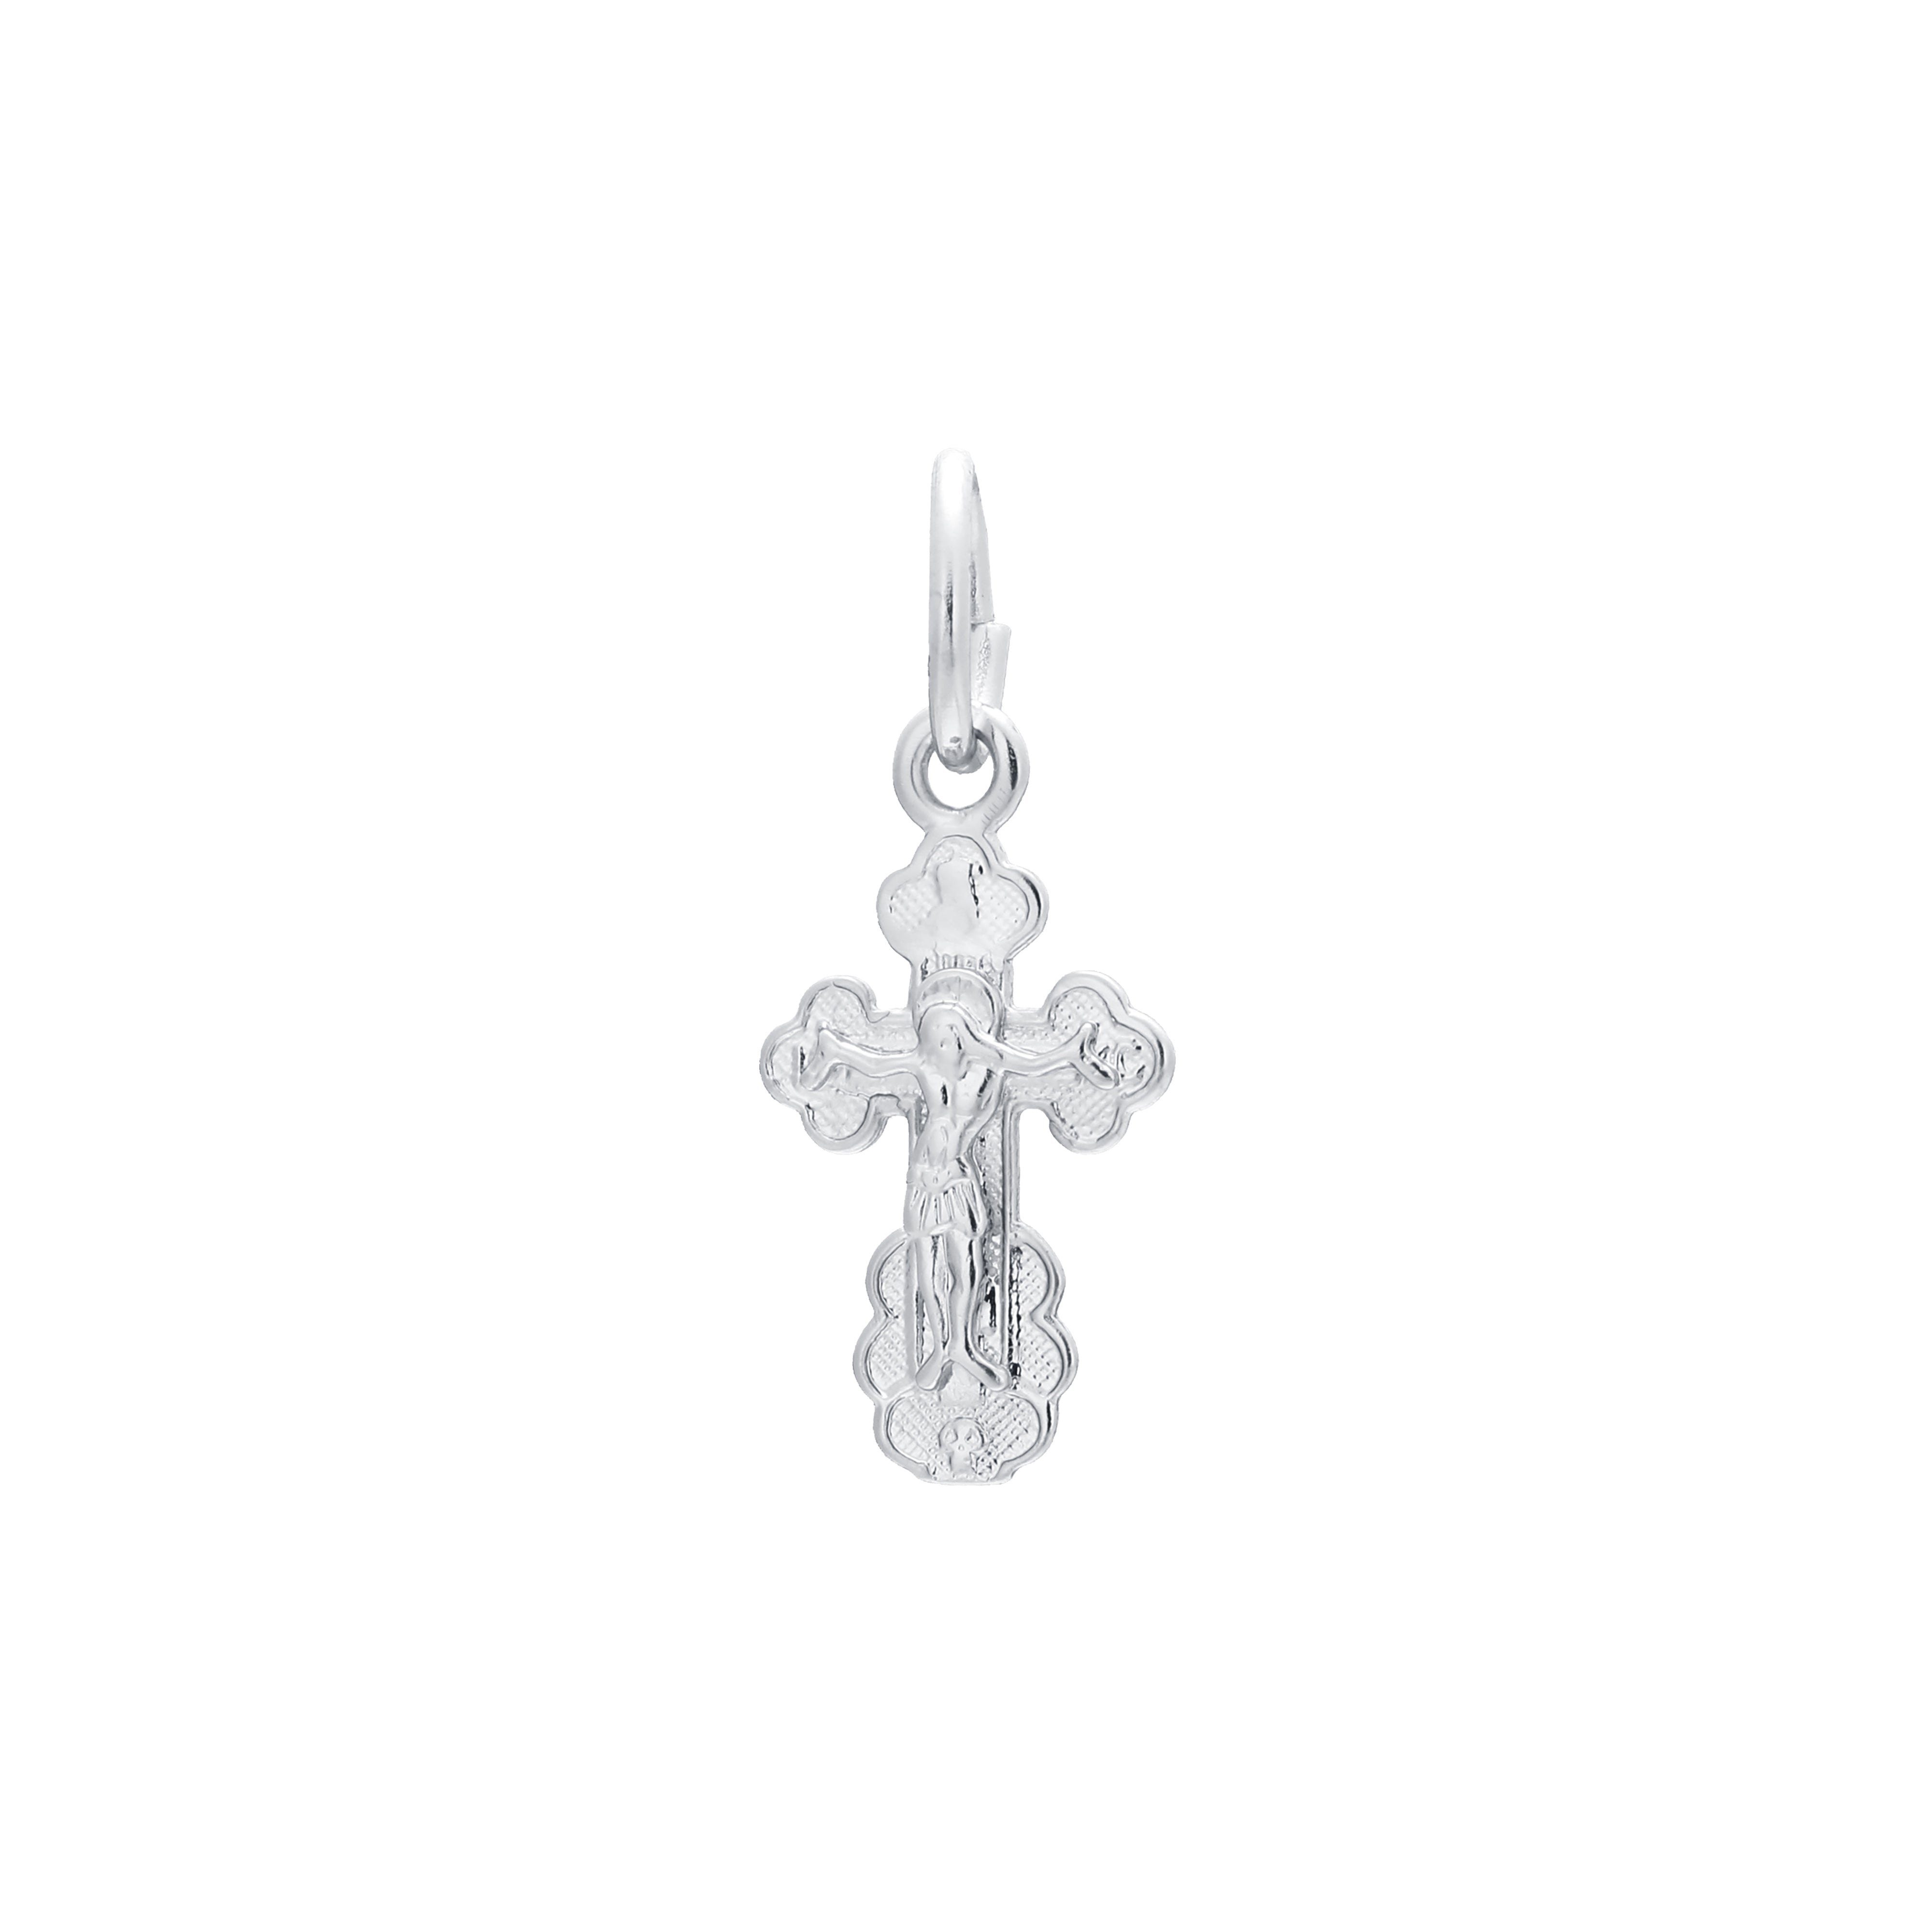 Catholic cross budded pendant in 14K Gold, Rose Gold & White Gold plating colors